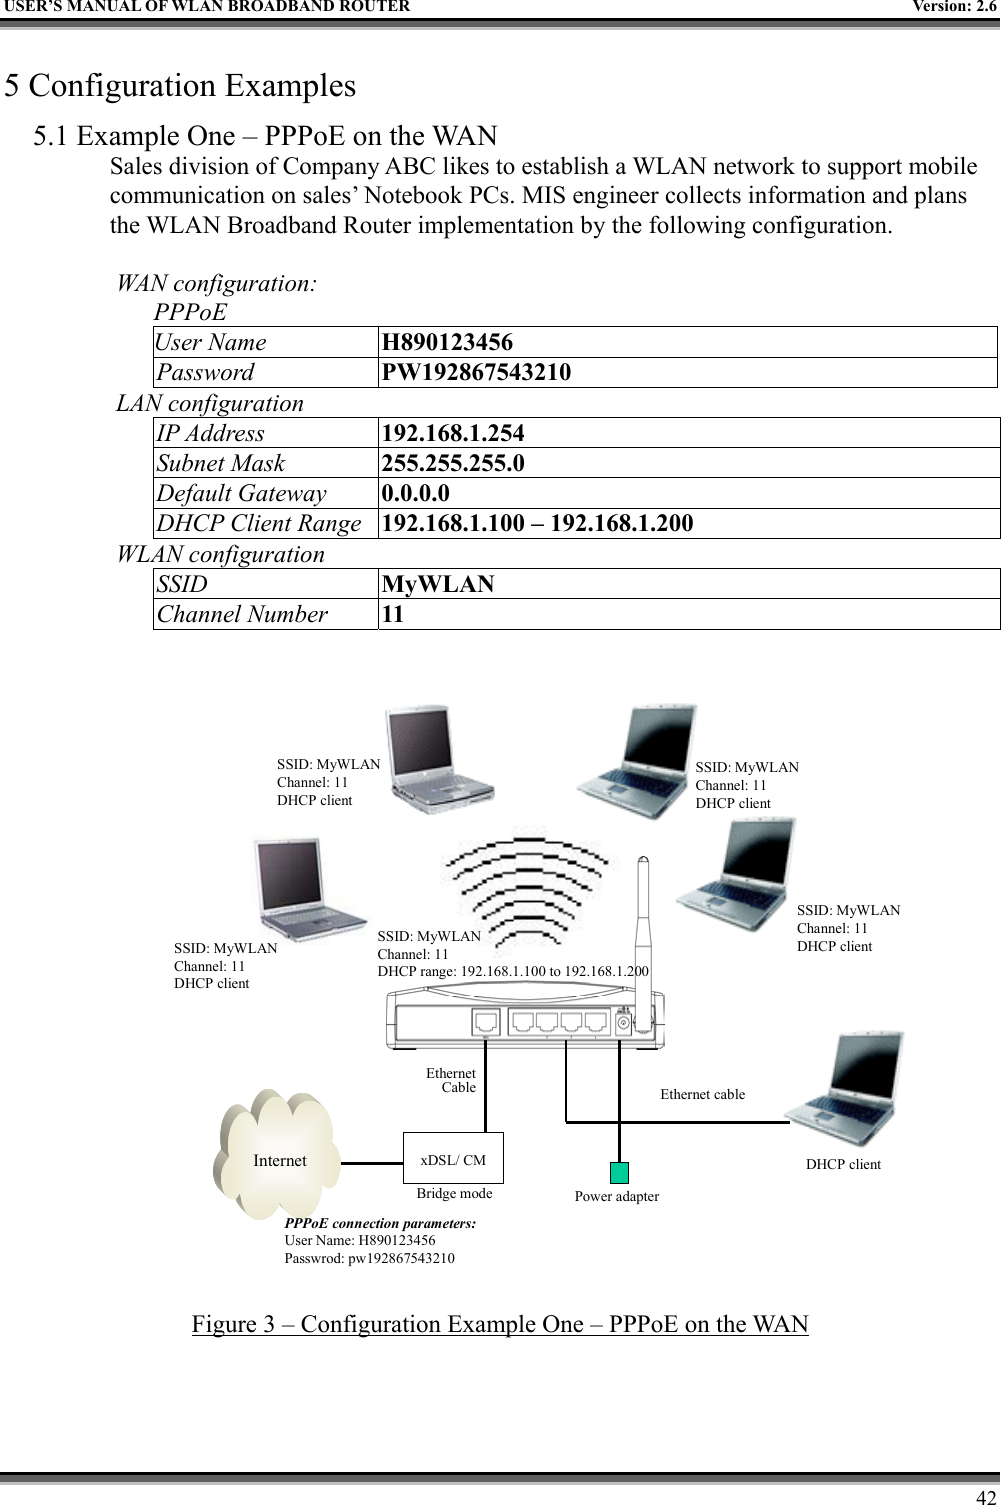   USER’S MANUAL OF WLAN BROADBAND ROUTER    Version: 2.6     42 5 Configuration Examples 5.1 Example One – PPPoE on the WAN Sales division of Company ABC likes to establish a WLAN network to support mobile communication on sales’ Notebook PCs. MIS engineer collects information and plans the WLAN Broadband Router implementation by the following configuration.  WAN configuration:   PPPoE User Name  H890123456 Password  PW192867543210 LAN configuration IP Address  192.168.1.254 Subnet Mask  255.255.255.0 Default Gateway  0.0.0.0 DHCP Client Range  192.168.1.100 – 192.168.1.200 WLAN configuration SSID  MyWLAN Channel Number  11 Internet xDSL/ CMPower adapterEthernetCable Ethernet cableSSID: MyWLANChannel: 11 DHCP clientSSID: MyWLANChannel: 11 DHCP clientSSID: MyWLANChannel: 11 DHCP clientSSID: MyWLANChannel: 11 DHCP clientDHCP clientBridge modePPPoE connection parameters:User Name: H890123456Passwrod: pw192867543210SSID: MyWLANChannel: 11DHCP range: 192.168.1.100 to 192.168.1.200 Figure 3 – Configuration Example One – PPPoE on the WAN 